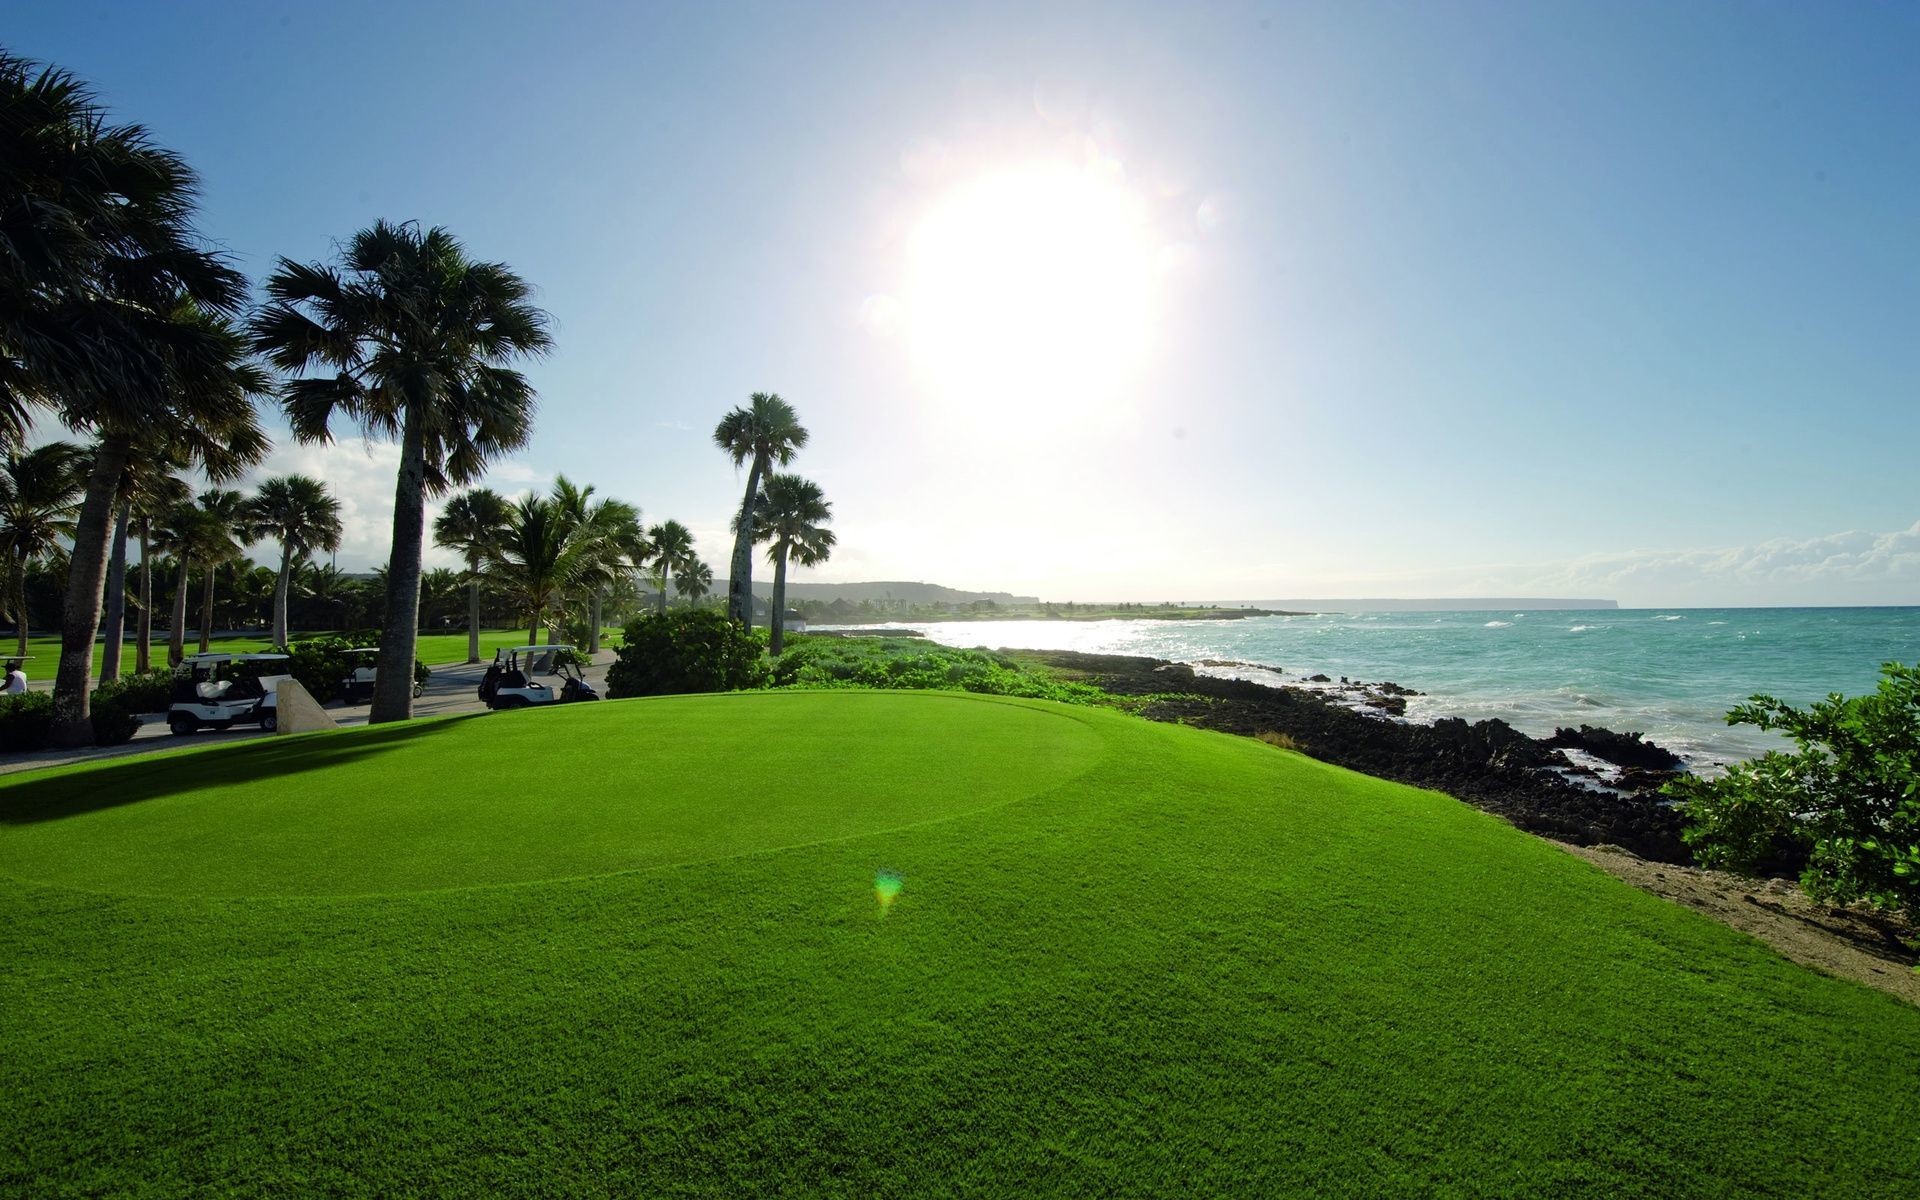 1920x1200 Golf Course By A Tropical Beach Desktop Background. Download  ...